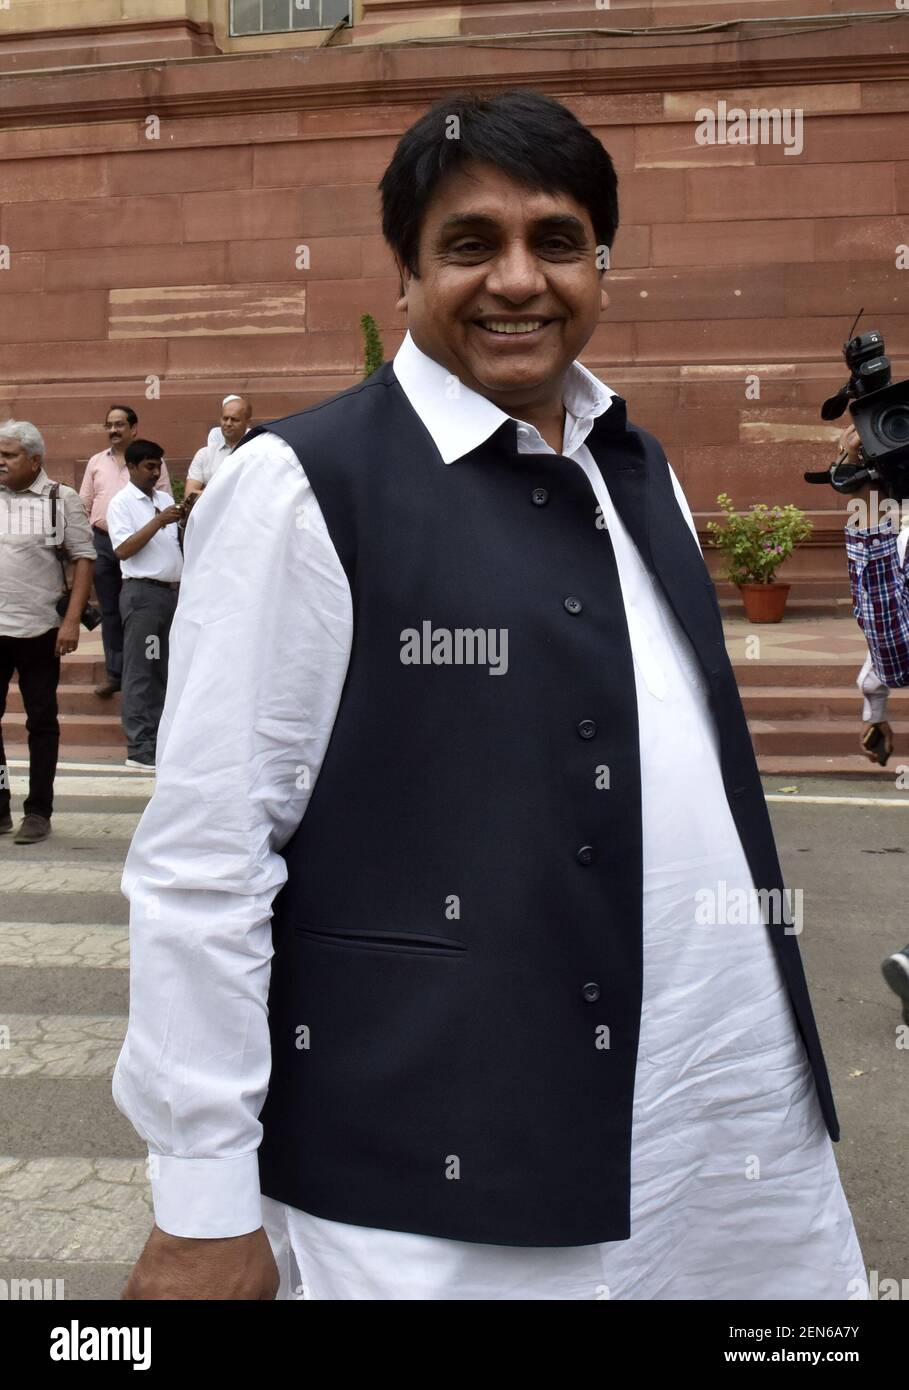 NEW DELHI, INDIA - JUNE 17: Newly elected Member of Parliament Malook Nagar arrives to attend the first session of 17th Lok Sabha, at Parliament of India on June 17, 2019 in New Delhi, India. In Parliament Budget session, which began on June 17 and will conclude on July 26, the NDA government is set to push crucial legislations, including a bill that seeks to criminalise the practice of instant divorce among Muslims. (Photo by Mohd Zakir/Hindustan Times/Sipa USA) Stock Photo